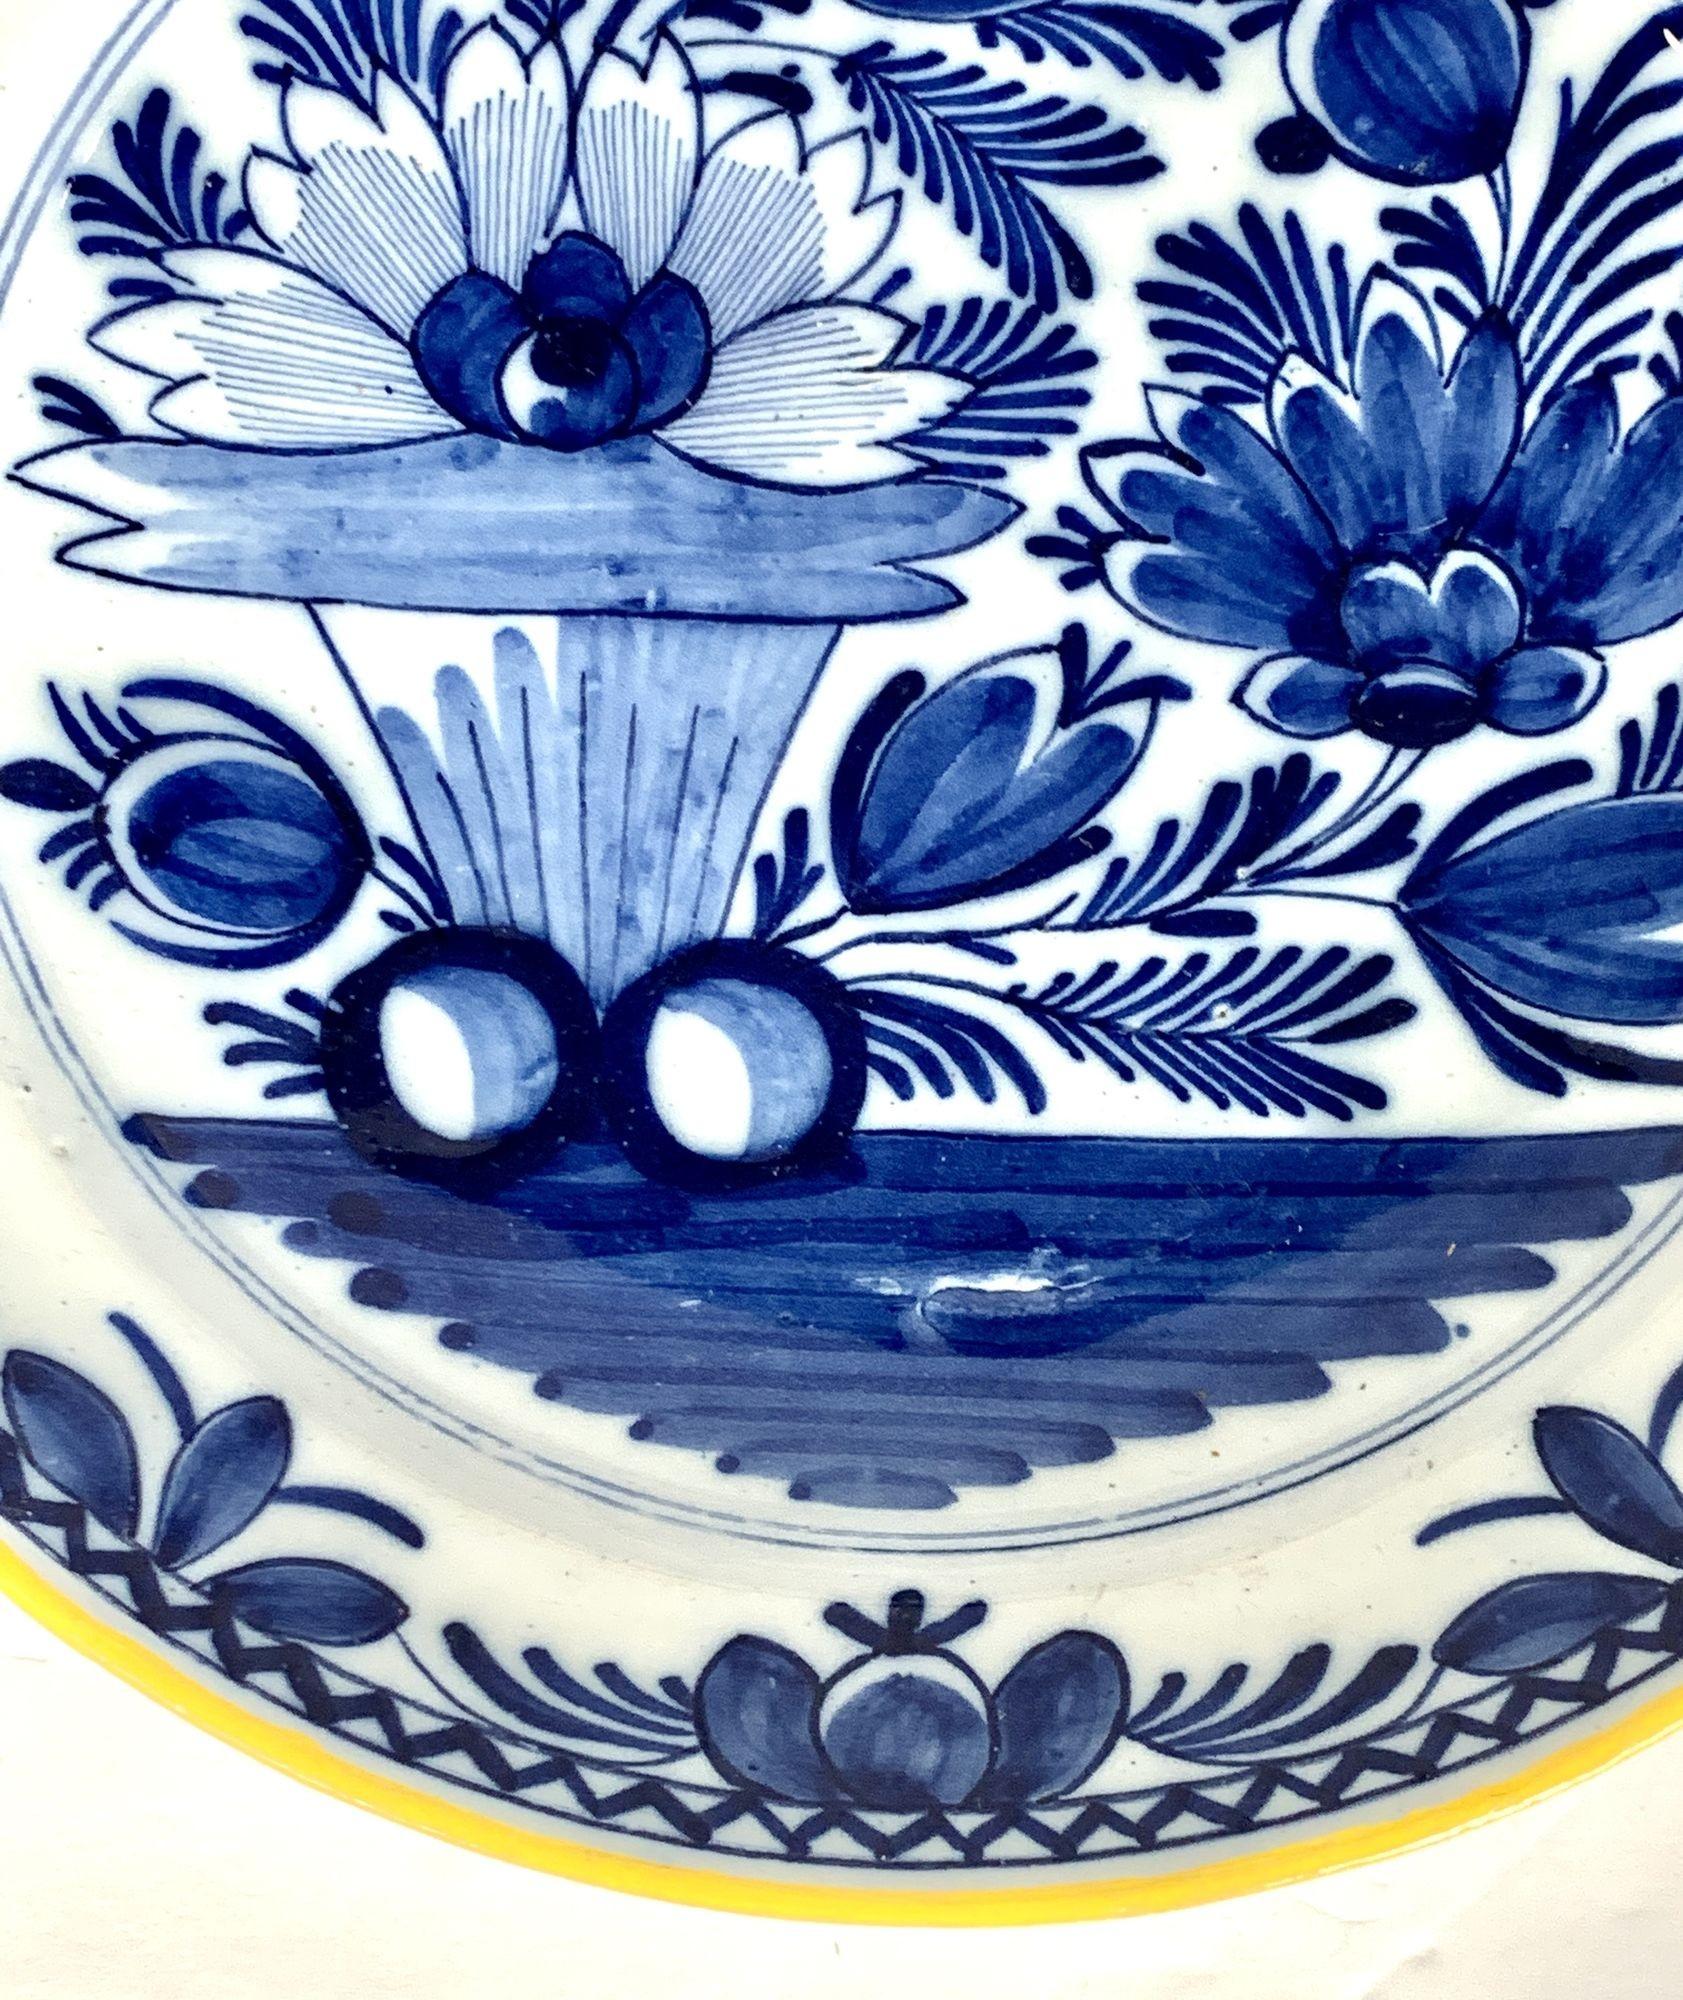 Rococo Blue and White Dutch Delft Charger Made Netherlands, circa 1800